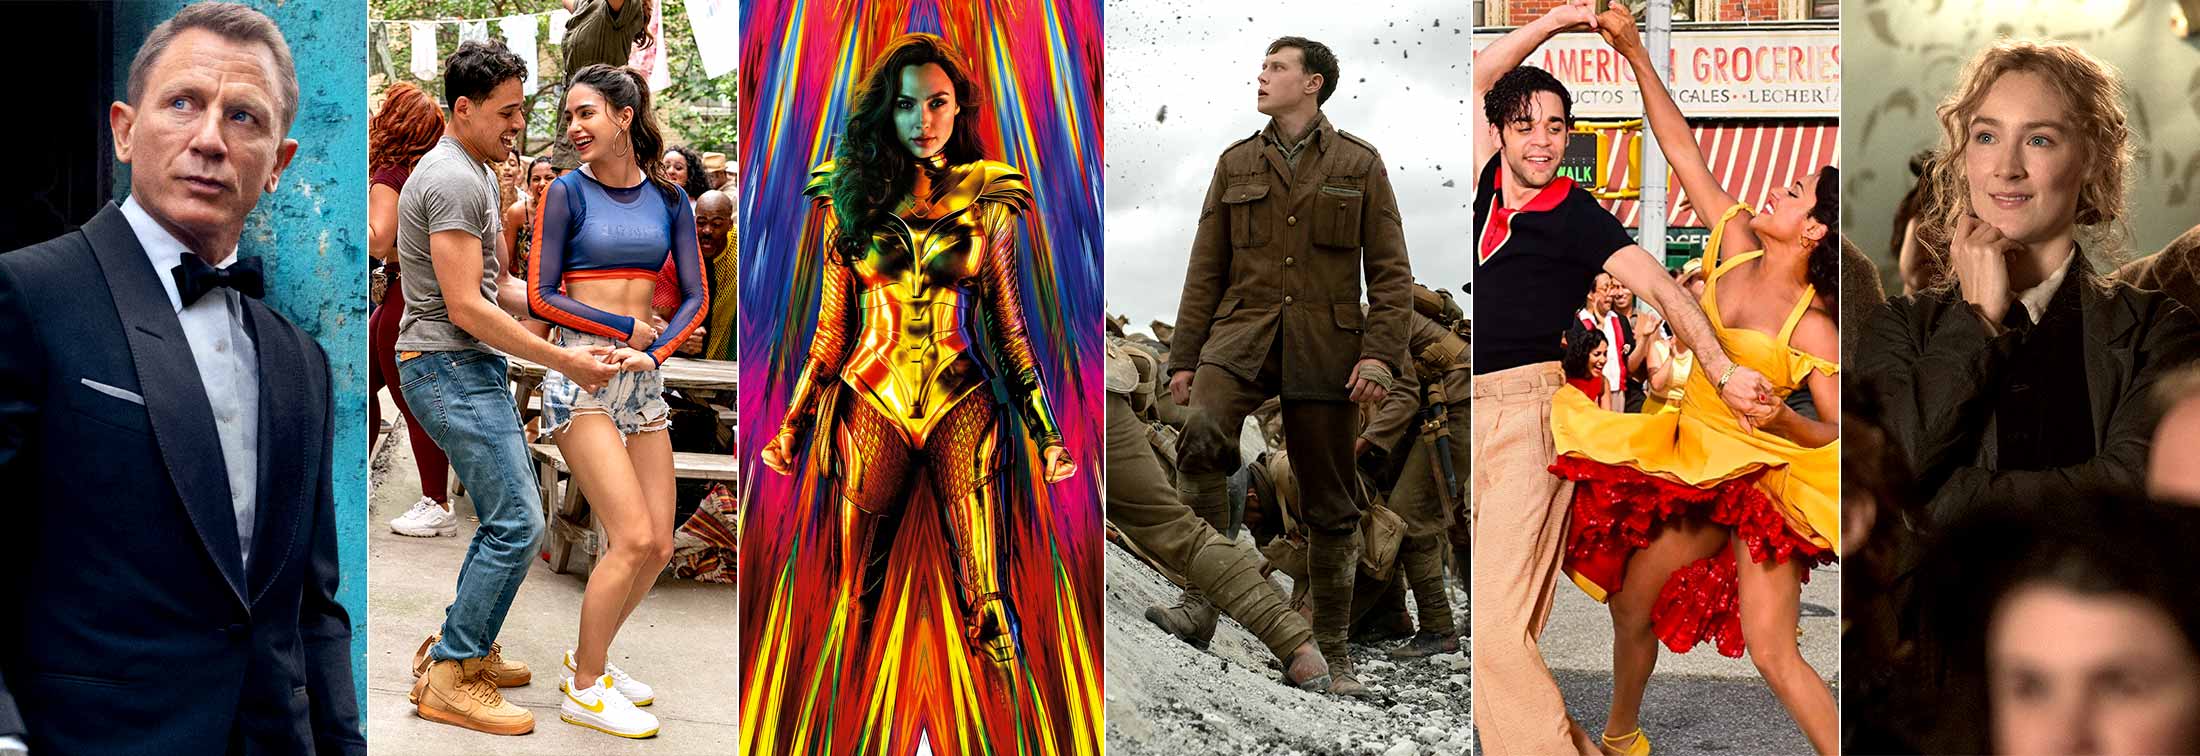 Most anticipated films of 2020 - Must-see movies for the coming year